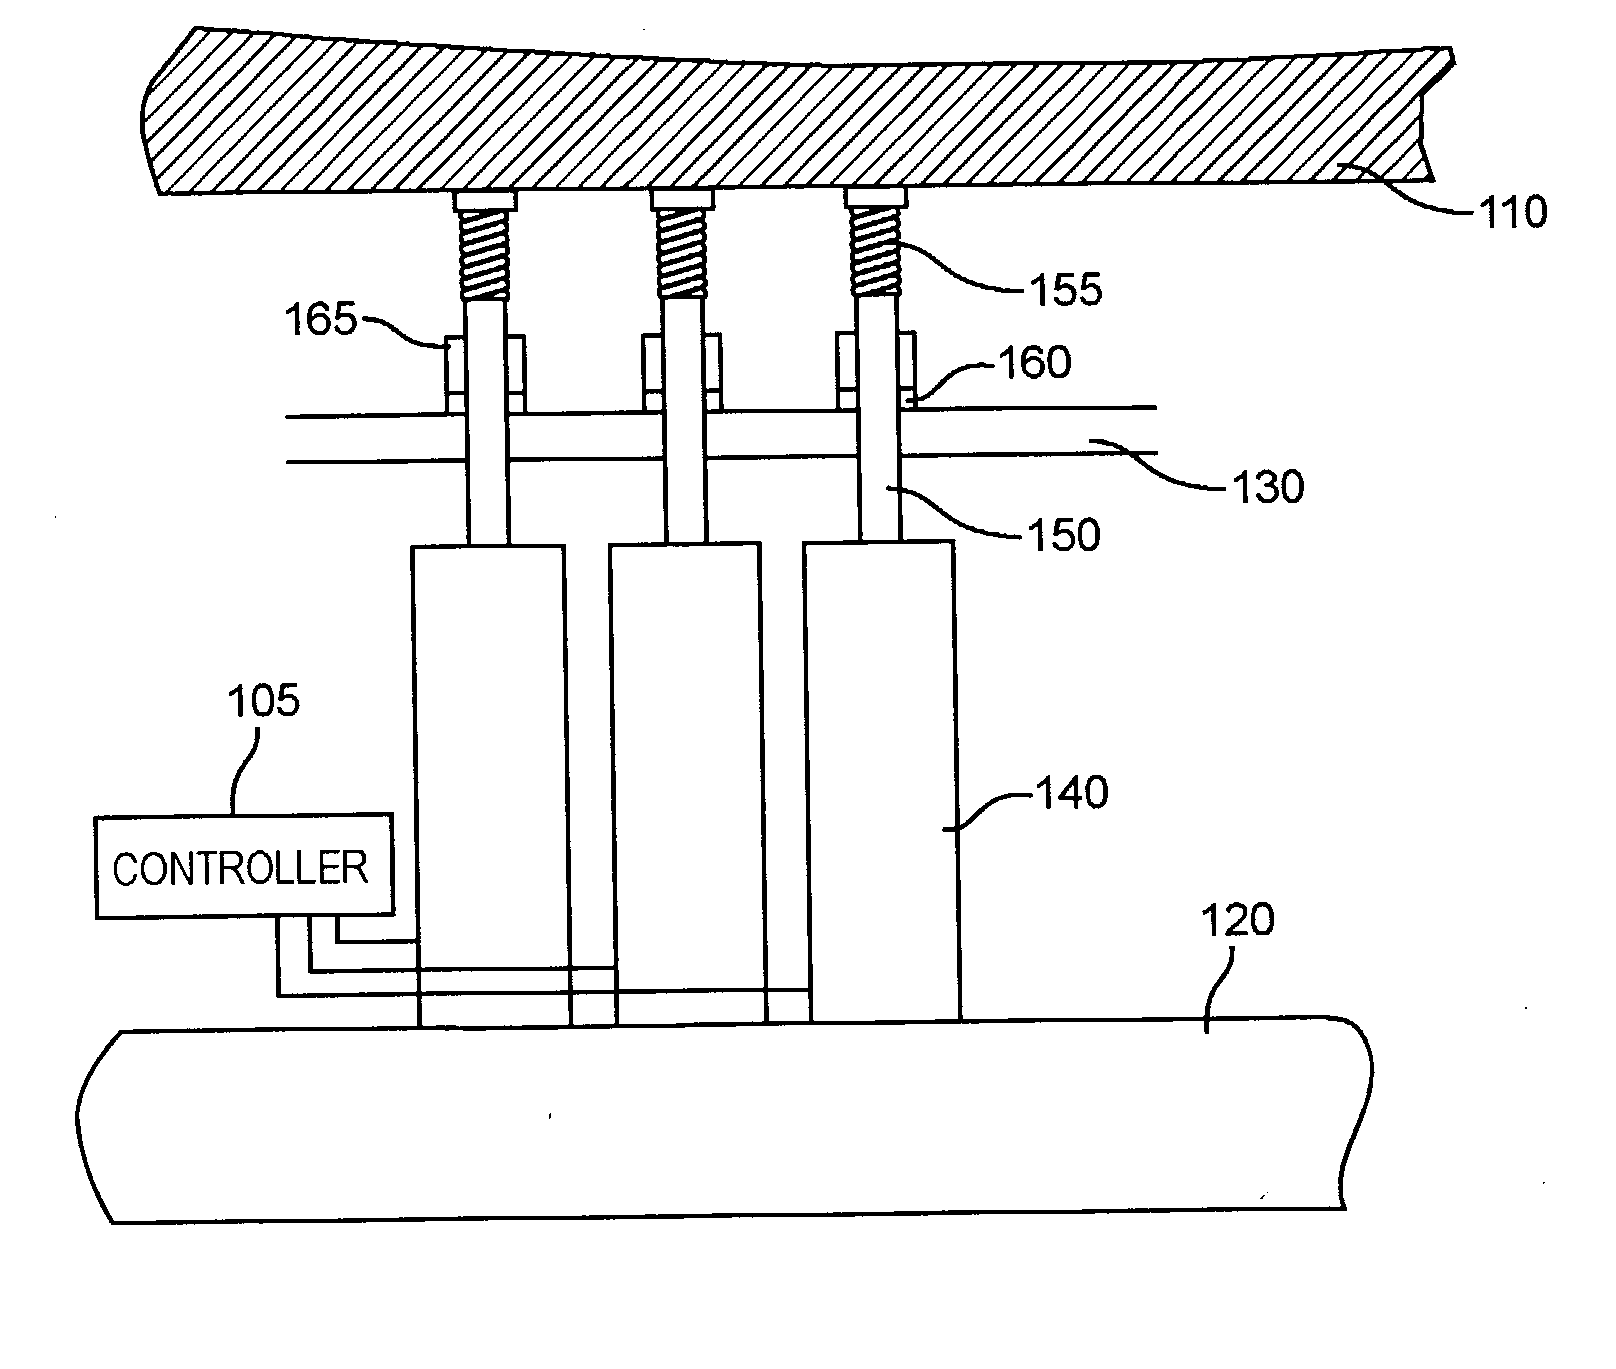 Deformable mirror actuation system